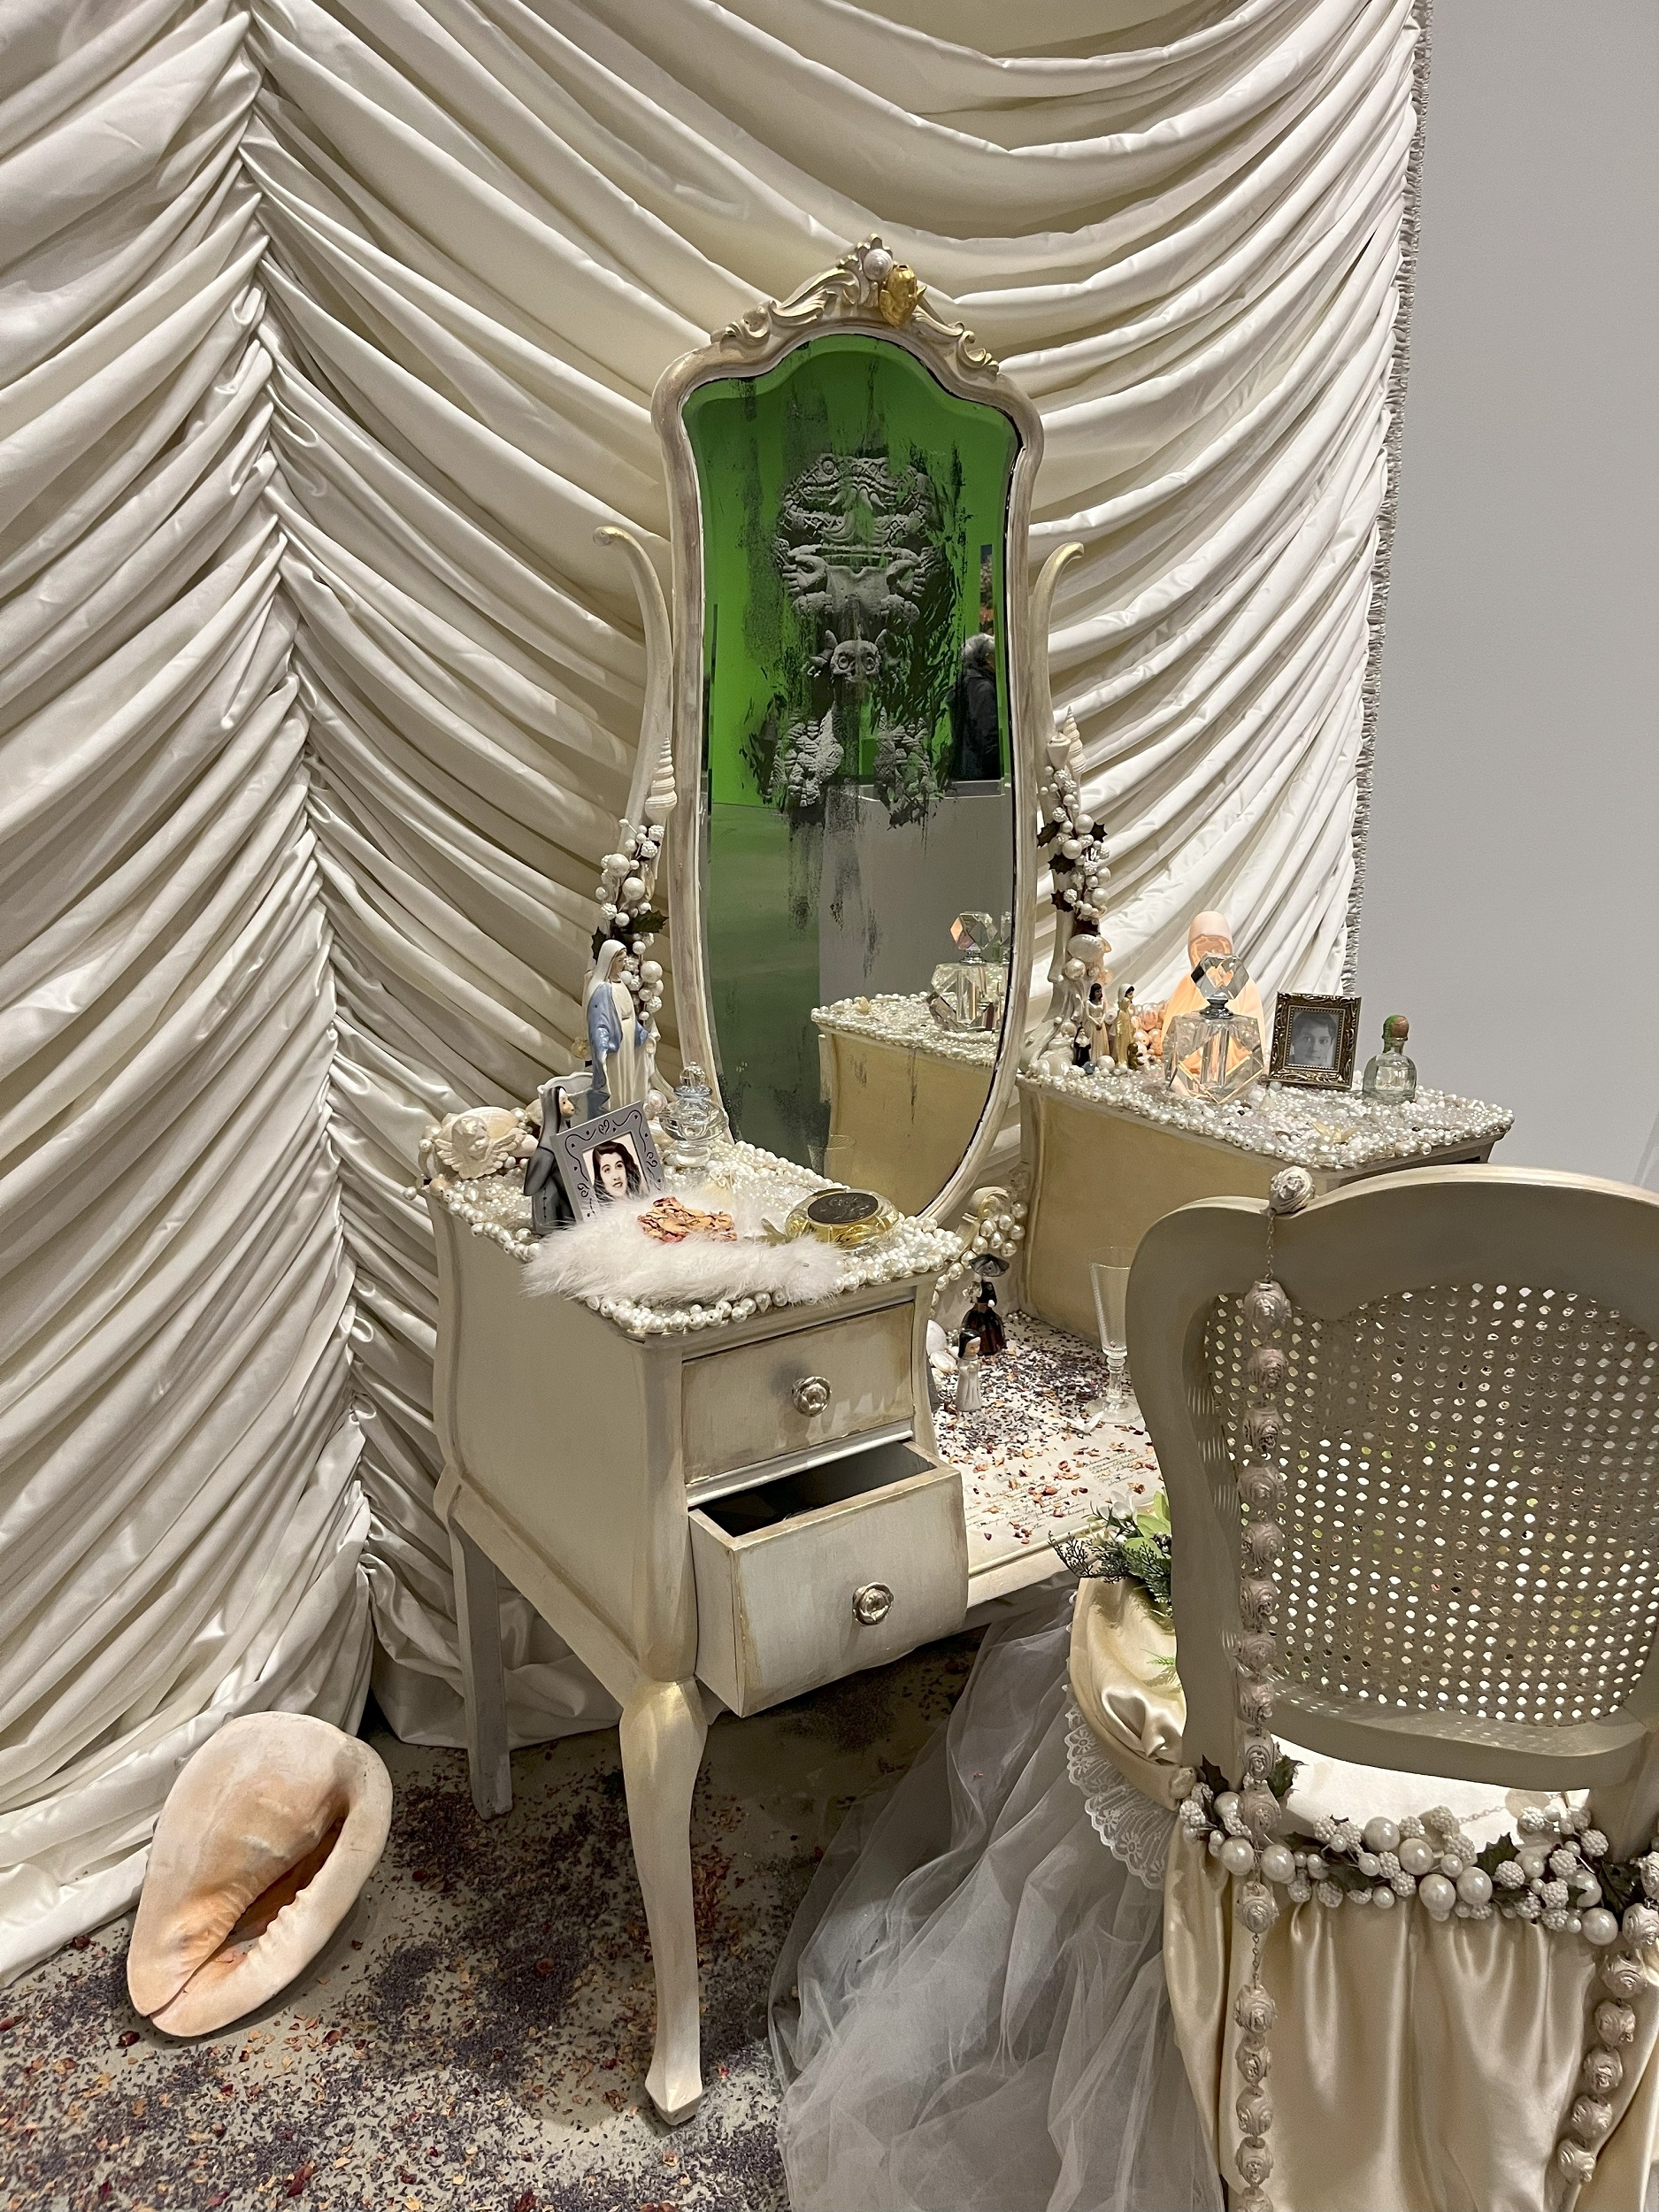 White-painted, mirror-topped vanity covered with decorative objects, in front of a ruched white curtain